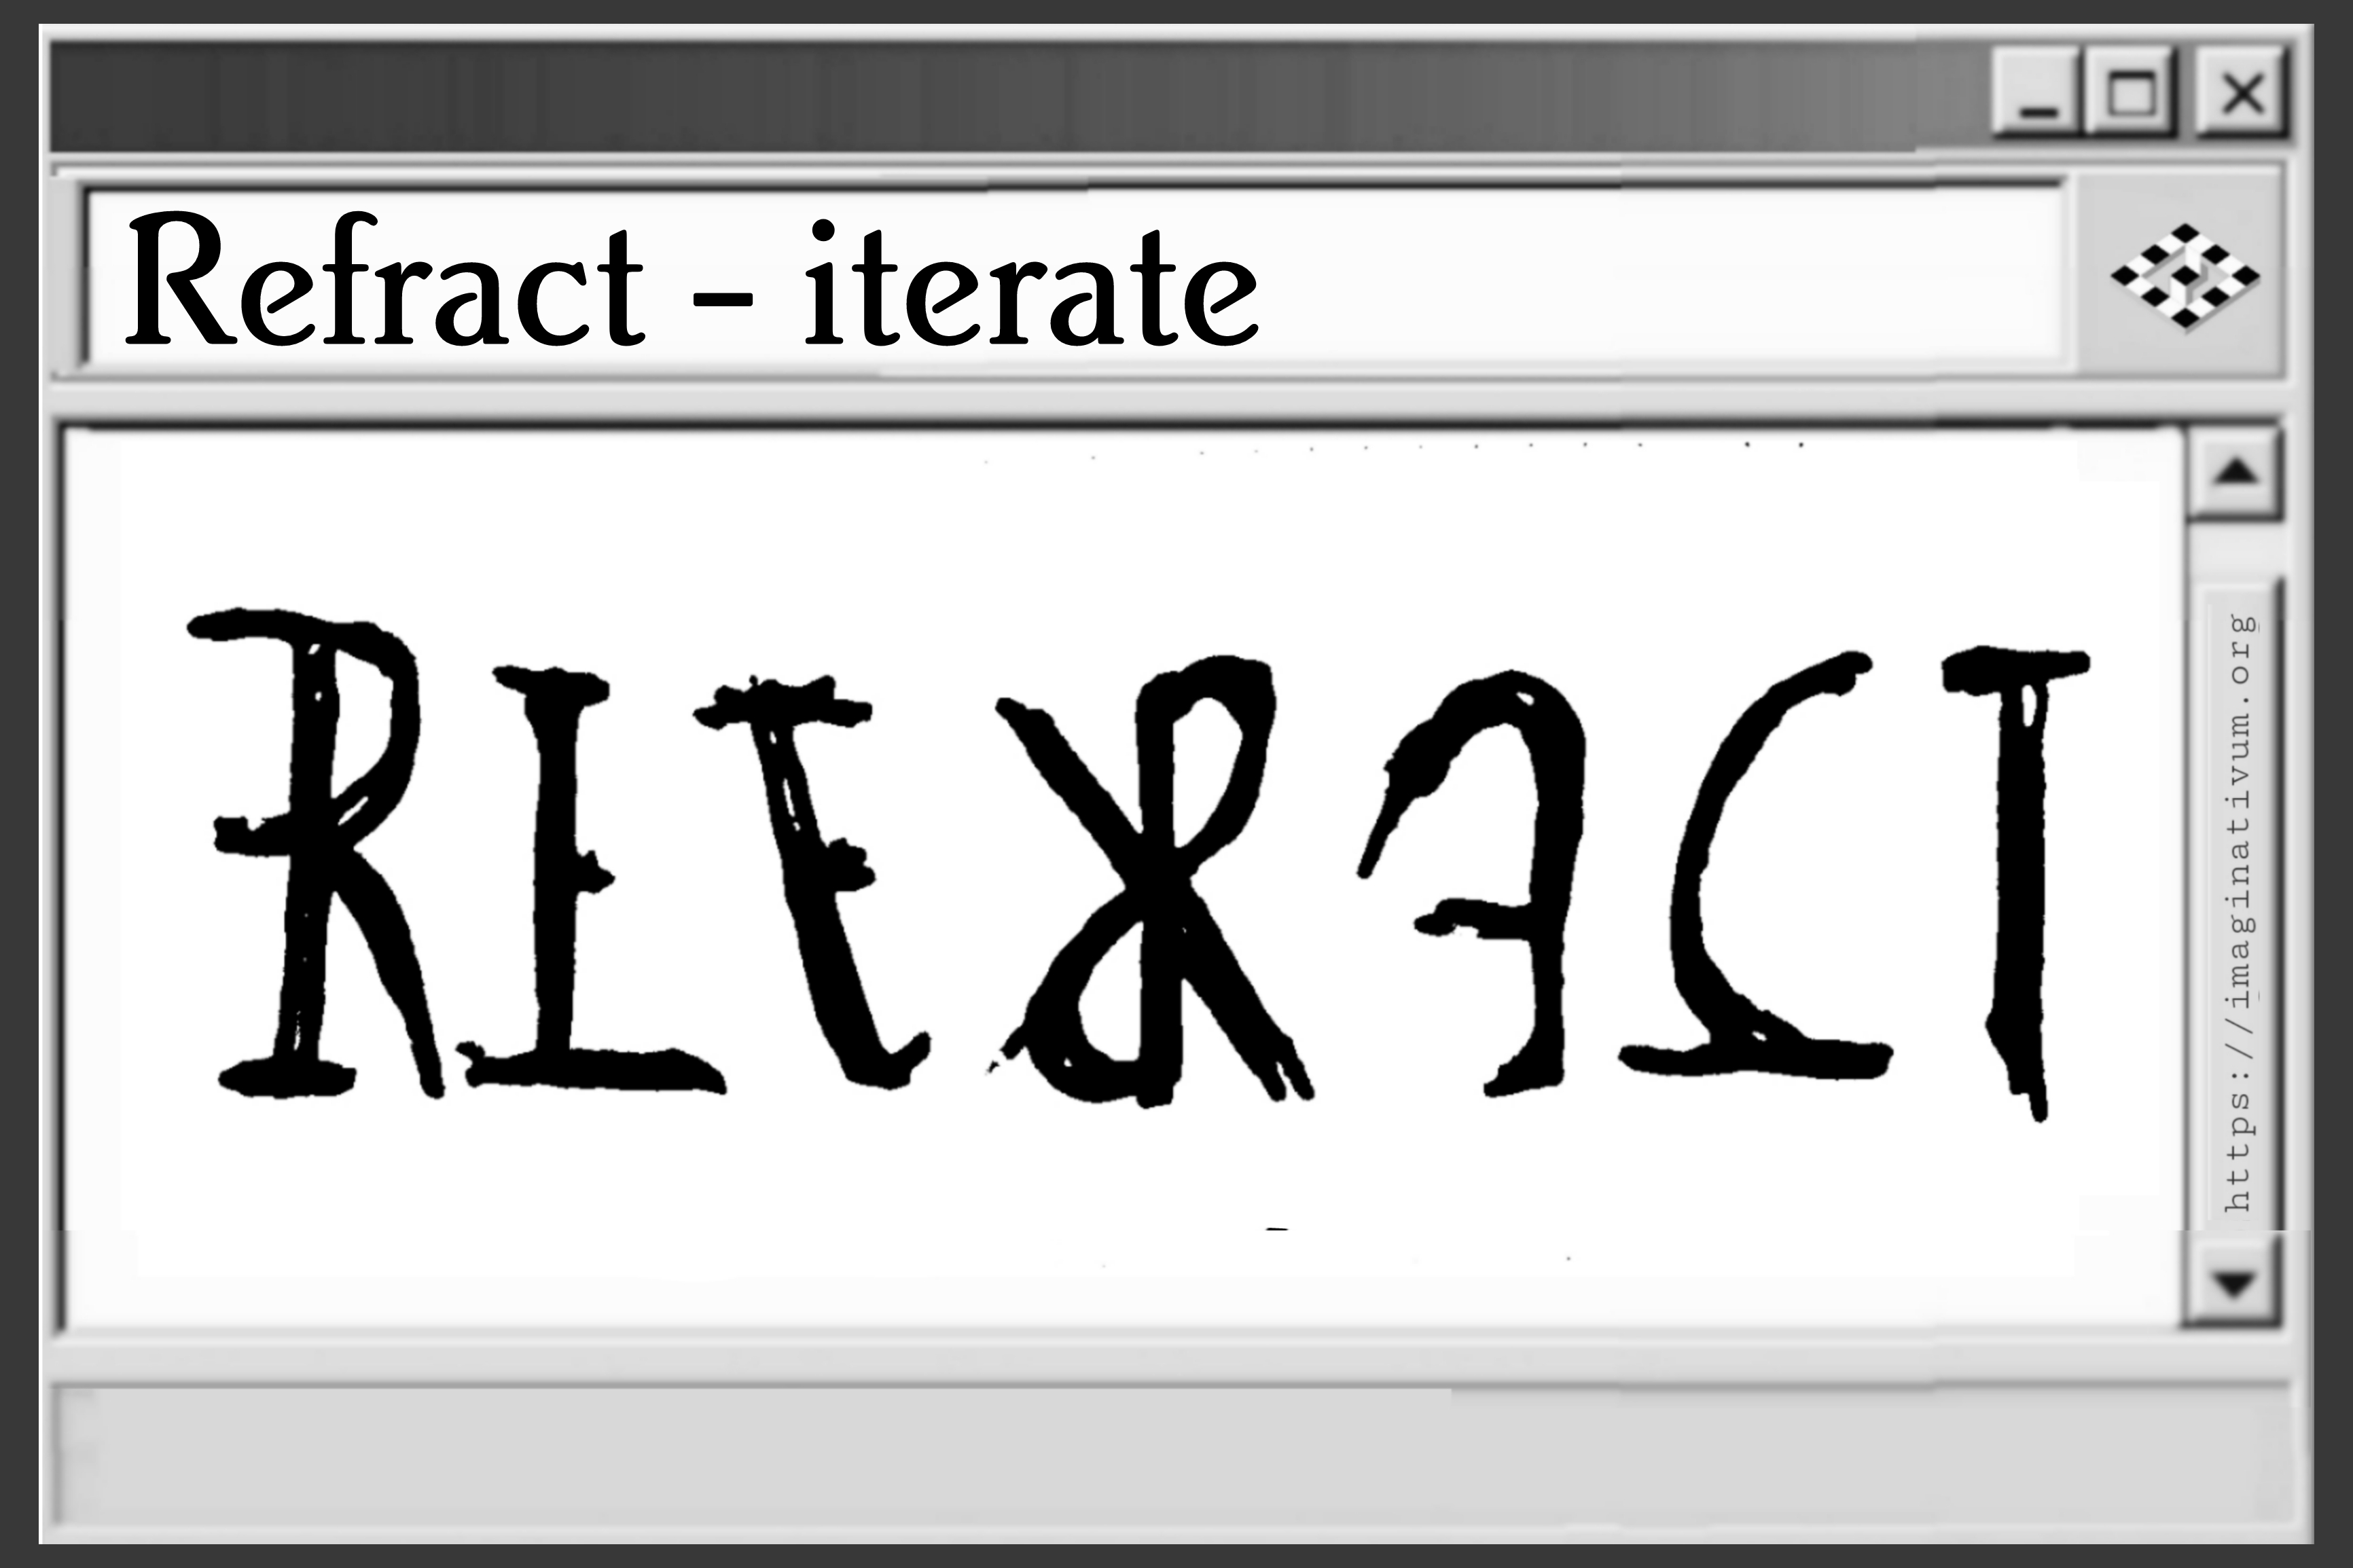 <b>Ambigram Refract Iterate</b><br/><br/>Often fractions/parts of fractals get iterated, so said, copied and simultaneously slightly changed. Iterations and refractions are often related.<br/>What happens if you refract an idea and instantly iterate it?